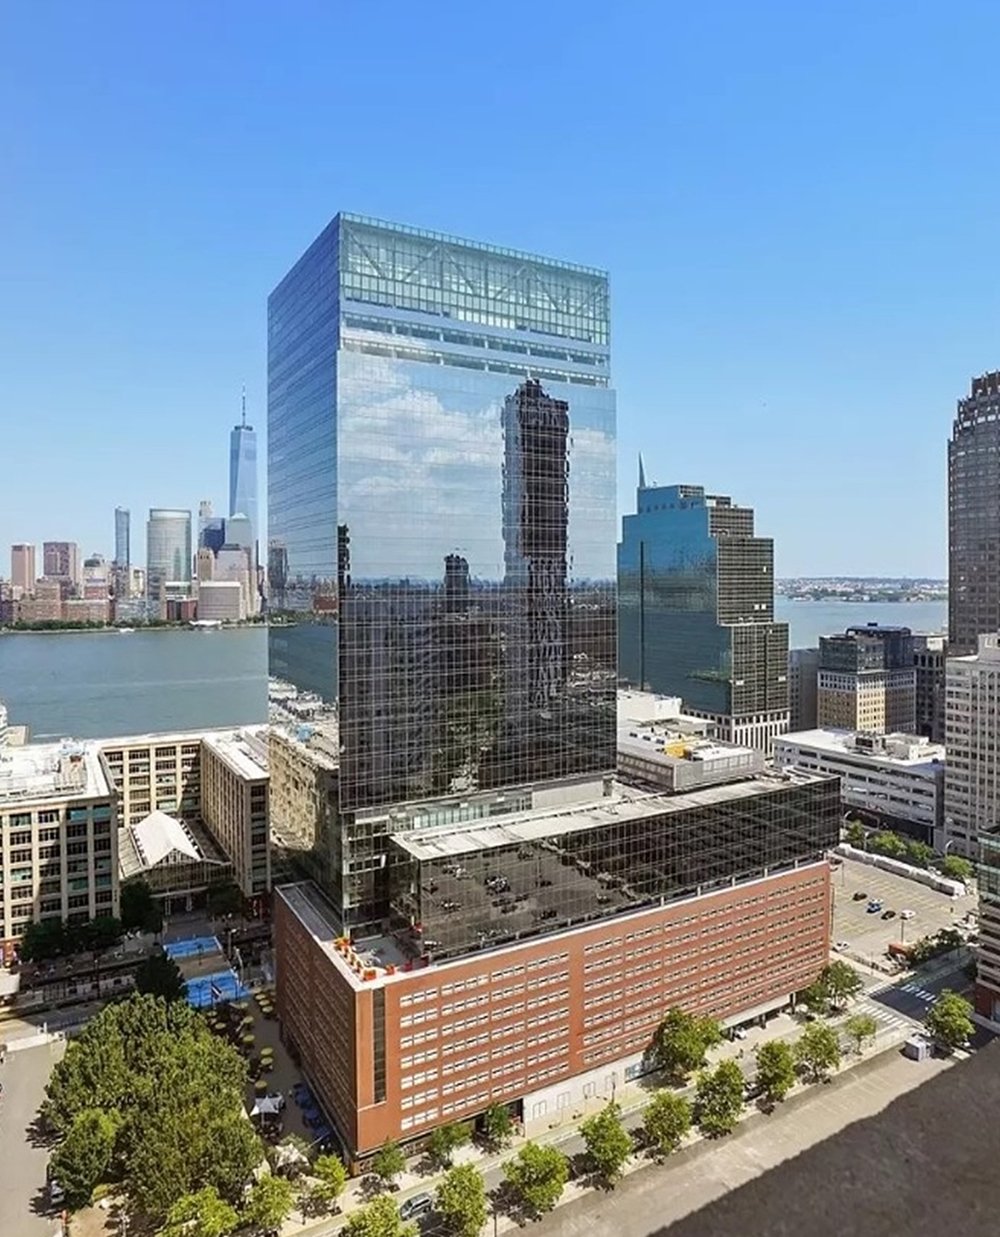 Situated in Jersey City’s waterfront district, Harborside 5 totals more than 1.5 million square feet and includes unobstructed views of Manhattan, a 1,150-spot parking garage, as well as a location adjacent to both Exchange Place PATH and ferry stations.